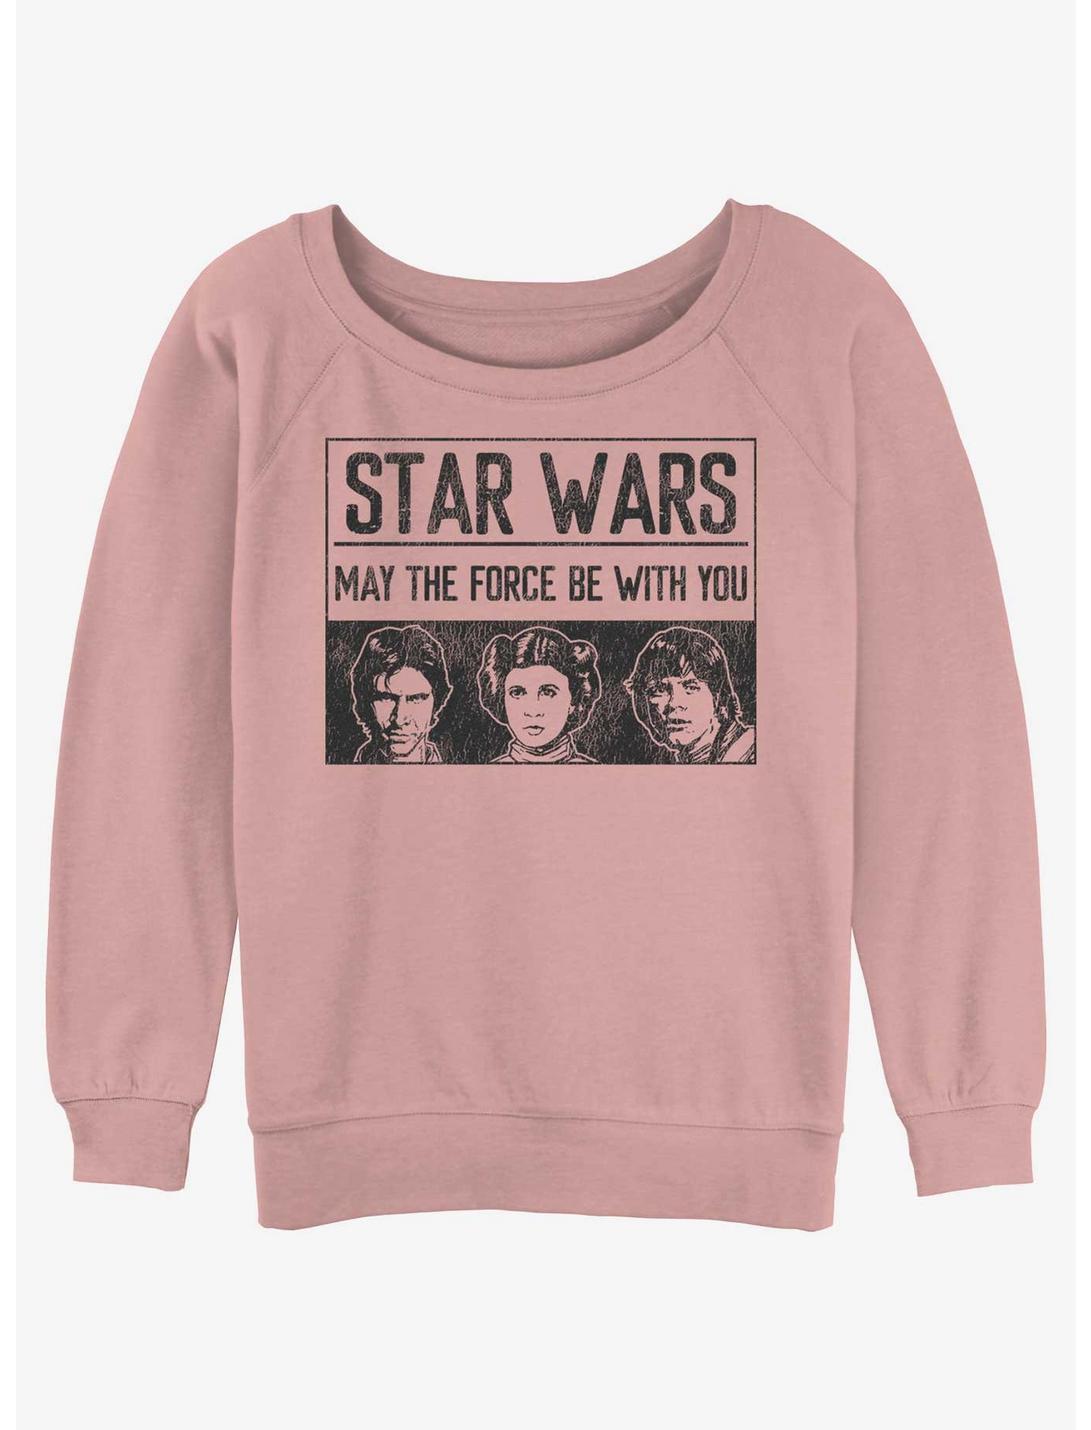 Star Wars May The Force Be With You Trio Womens Slouchy Sweatshirt, DESERTPNK, hi-res